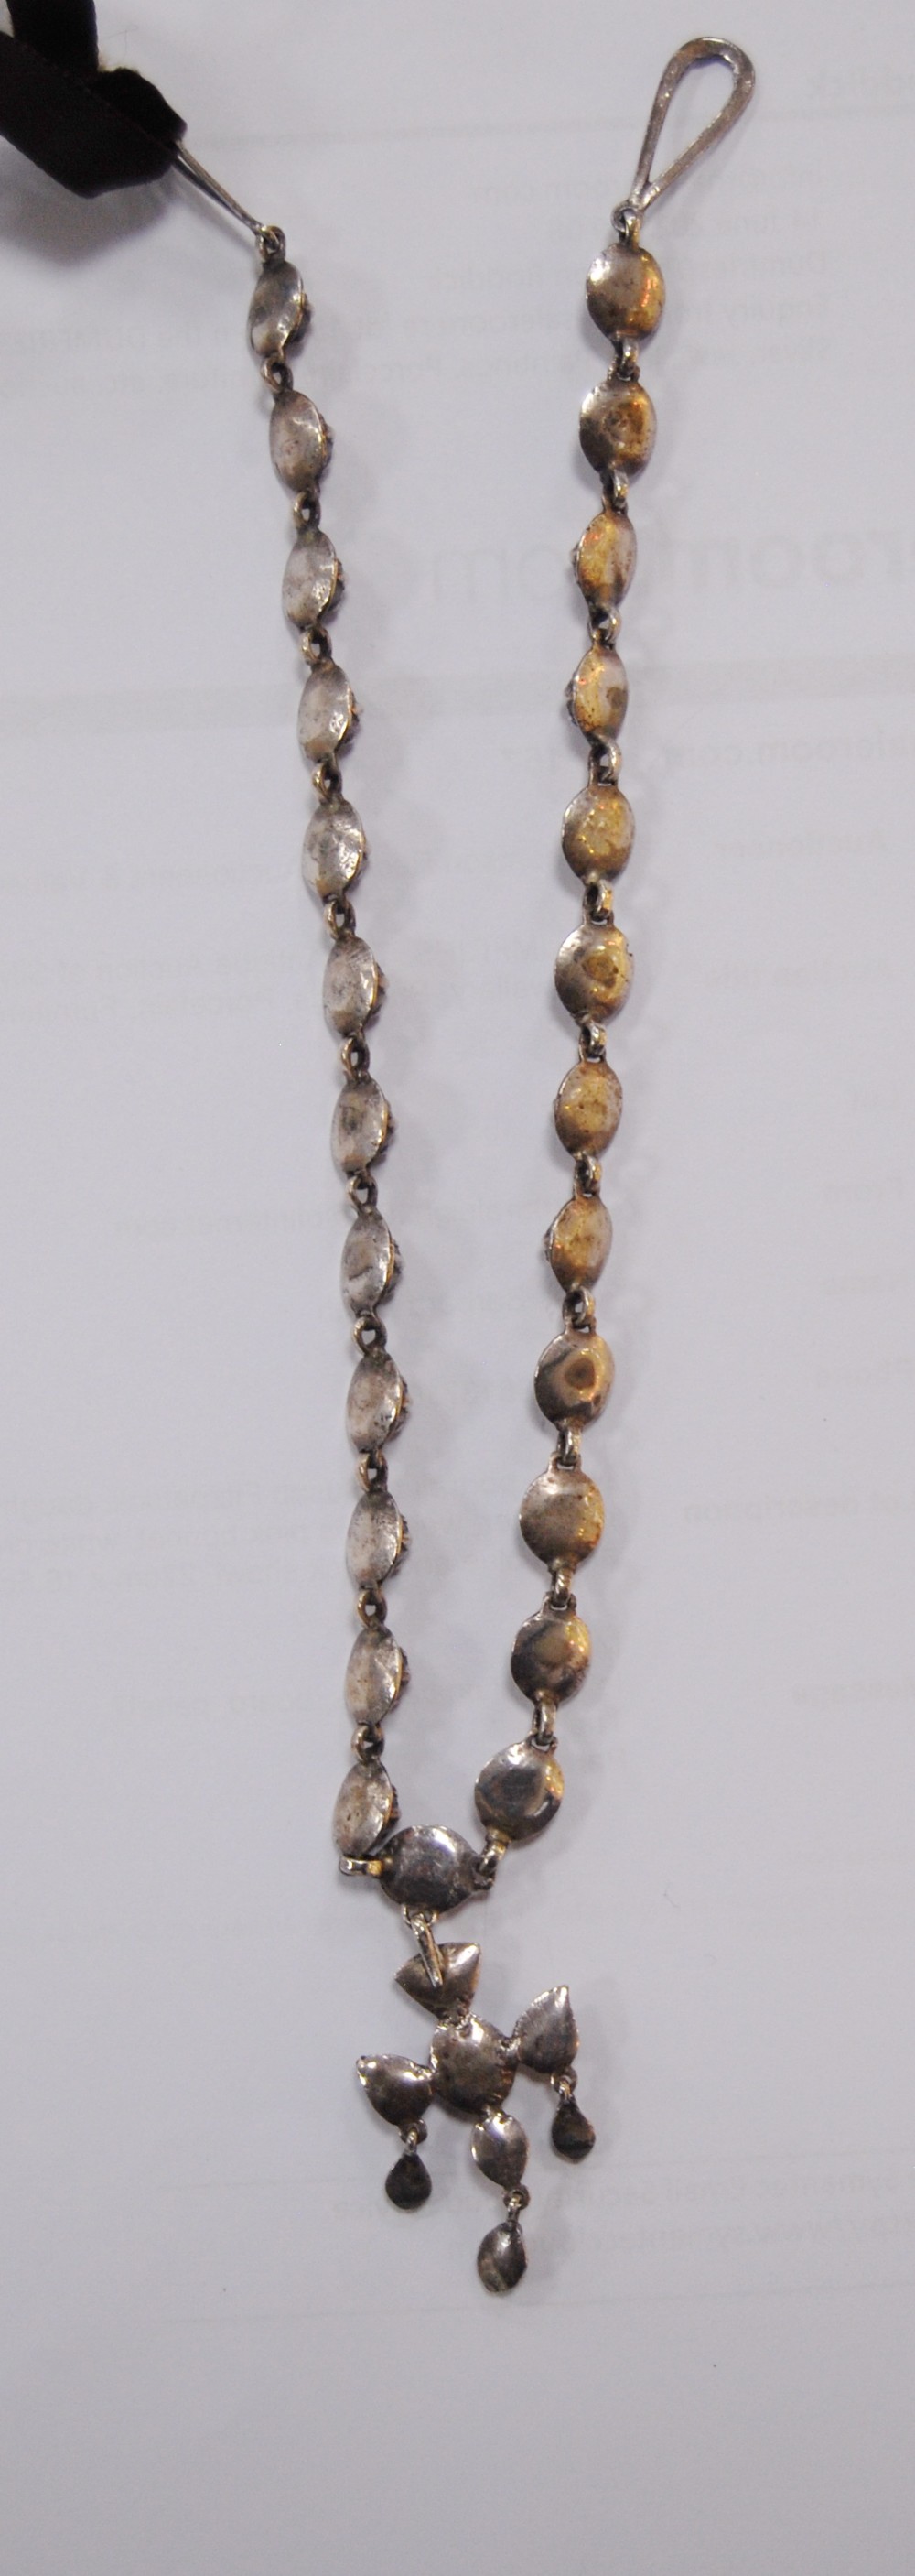 French 19th century silver necklace with foiled citrines and similar cruciform drop. - Image 9 of 9